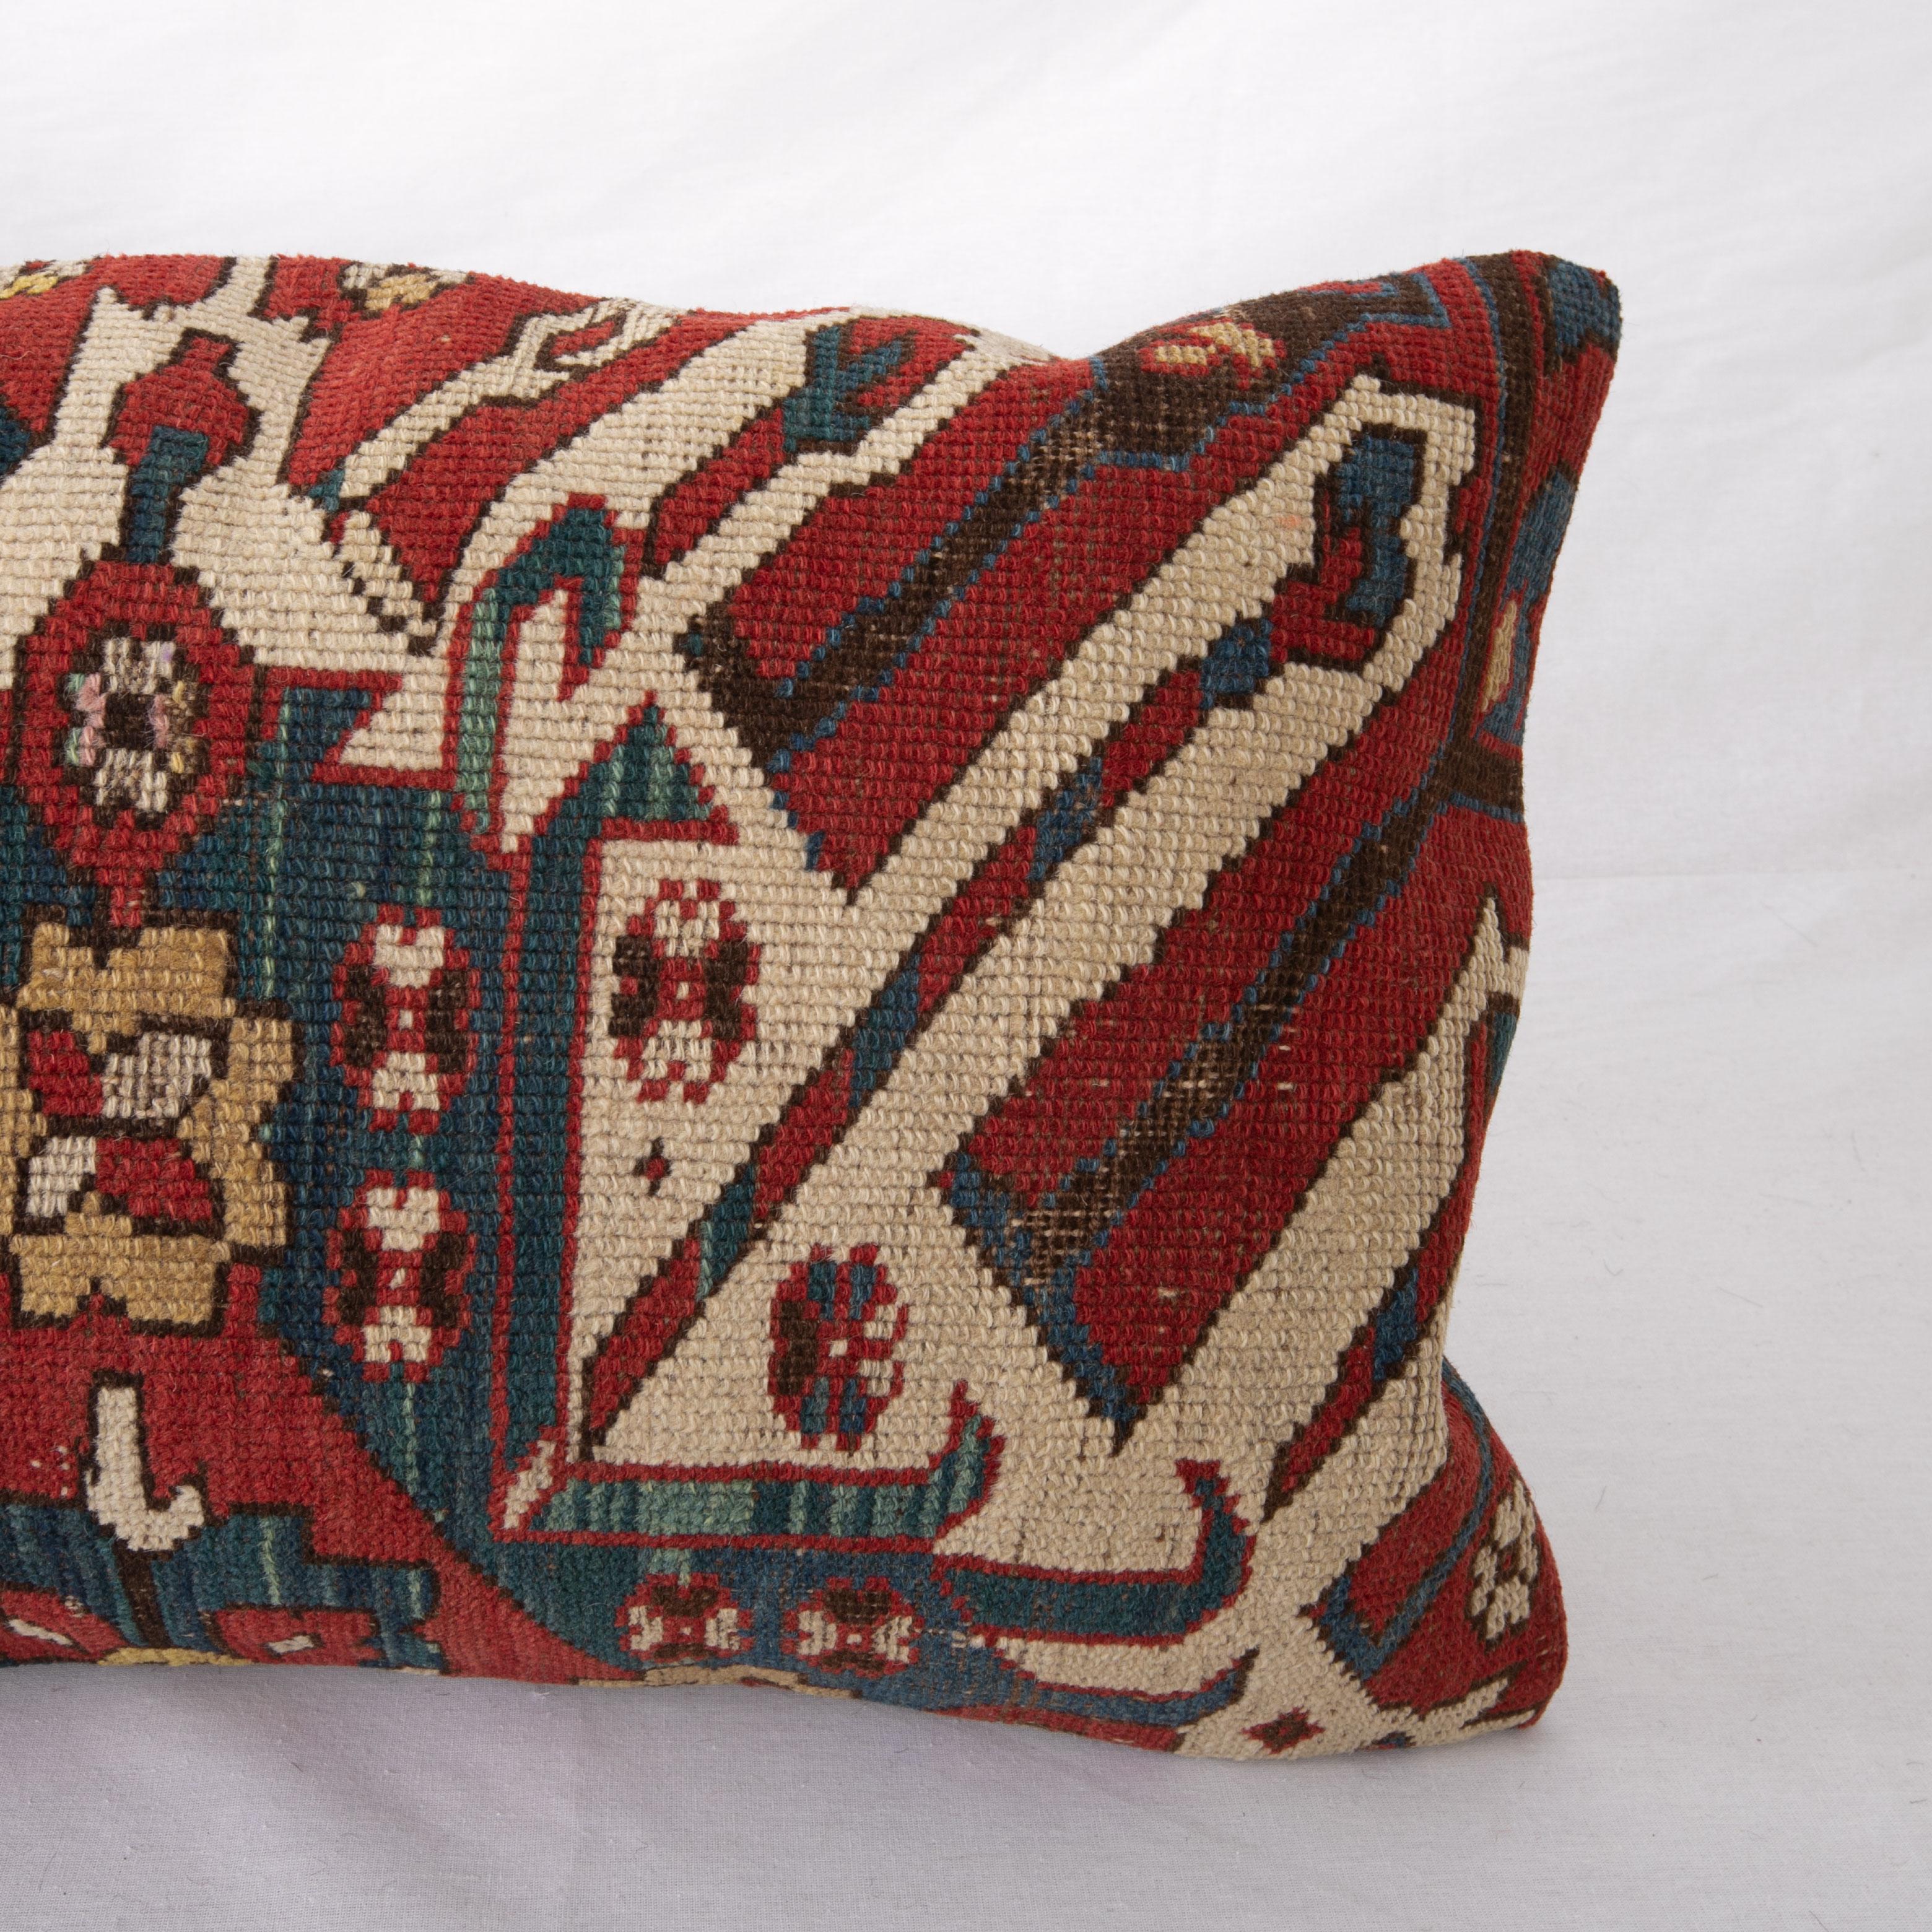 Hand-Woven Rug Pillow Cover Made from a Caucasian Eagle Kazak Rug, Late 19th C. For Sale